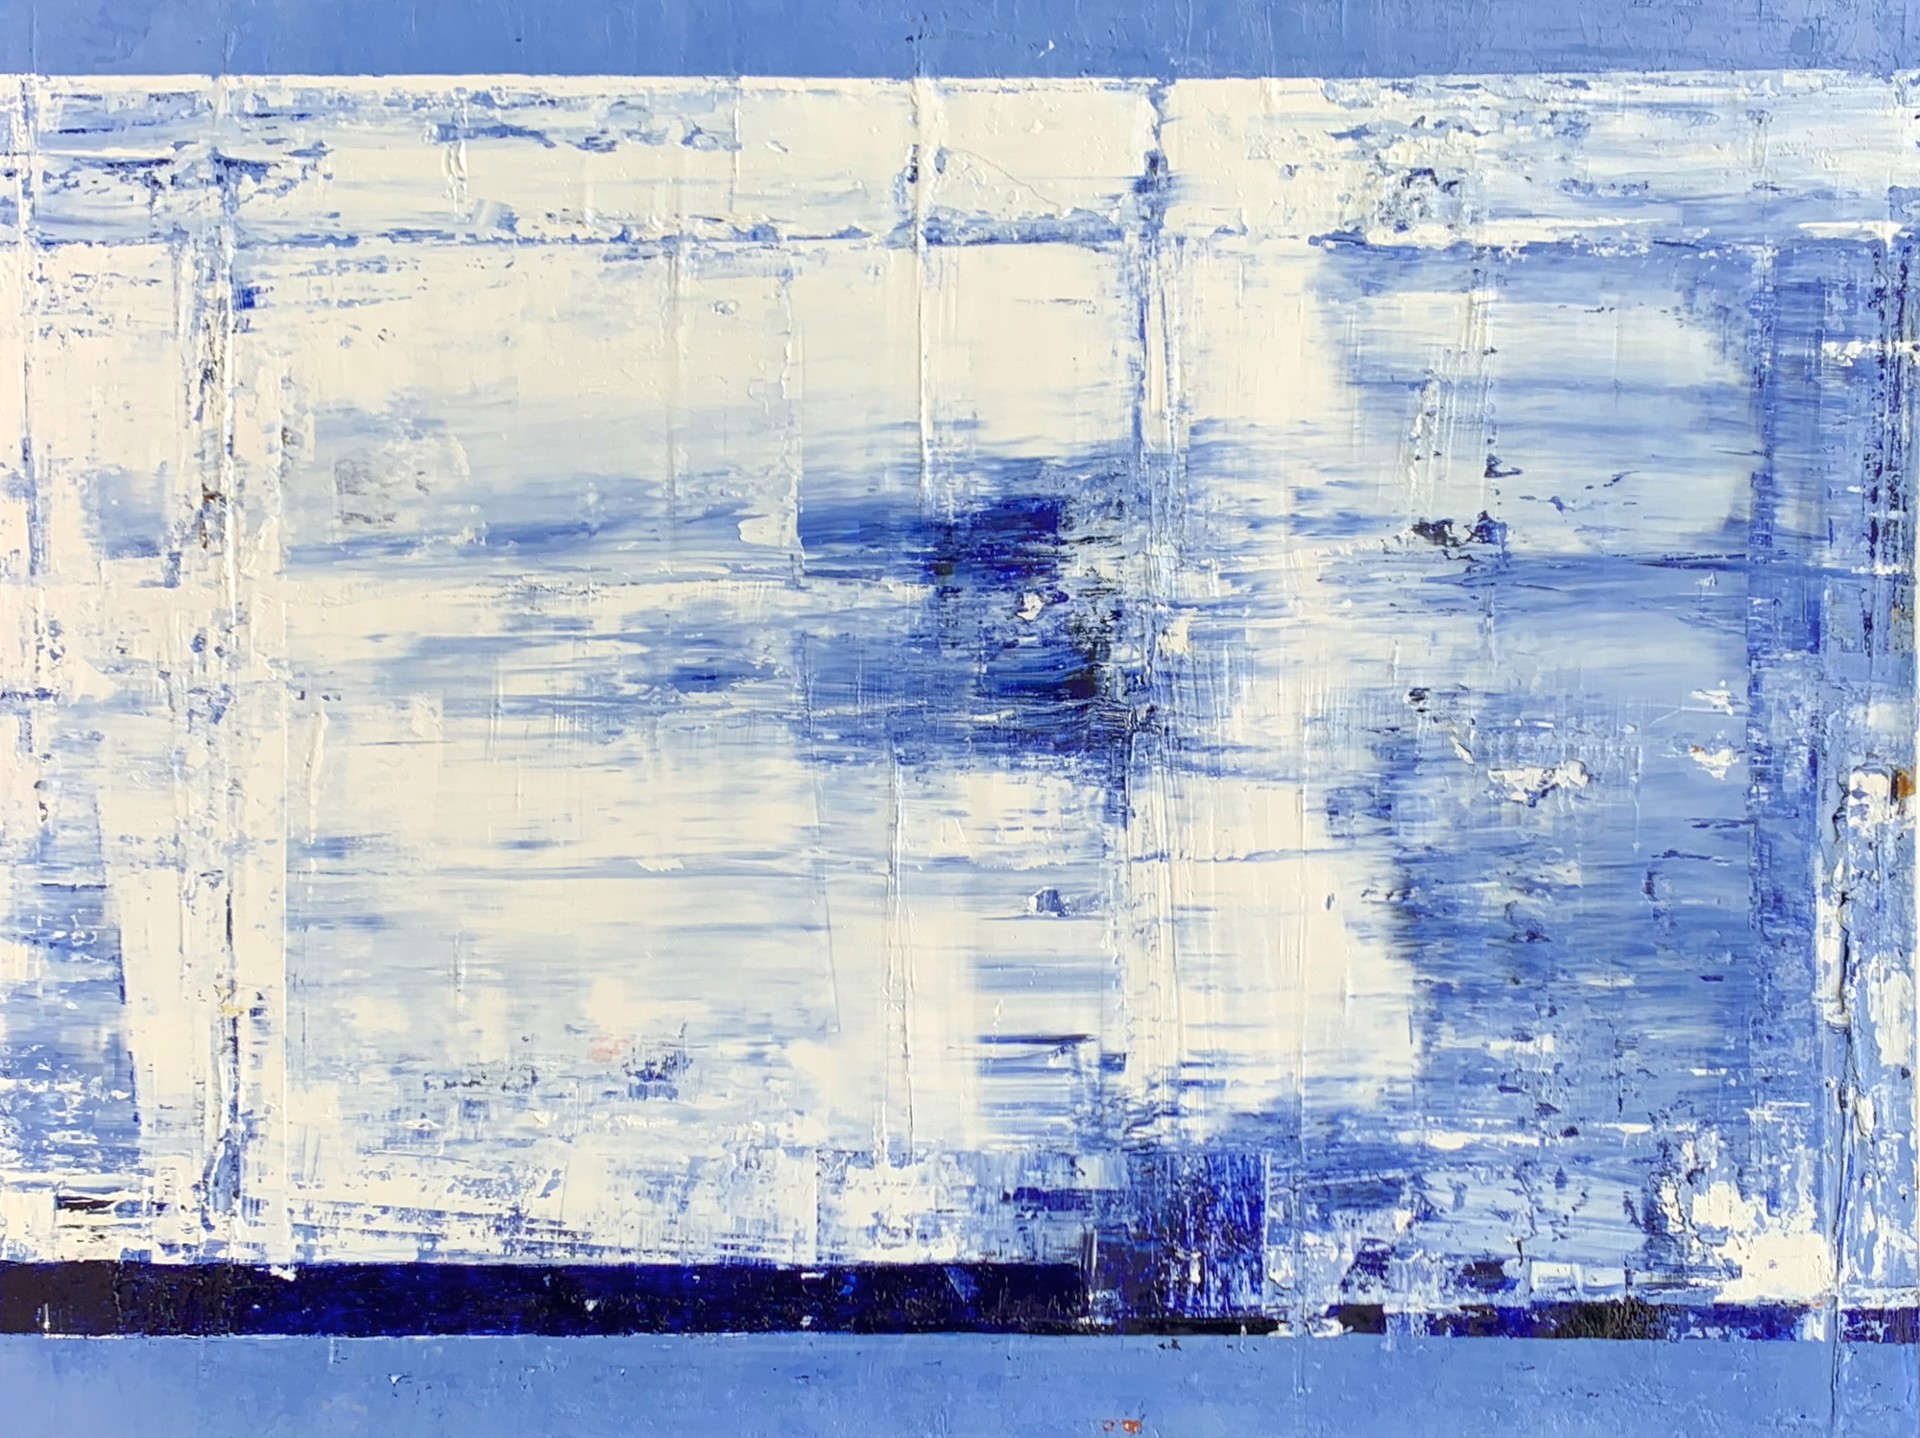 Blue/White No. 16 by William Song